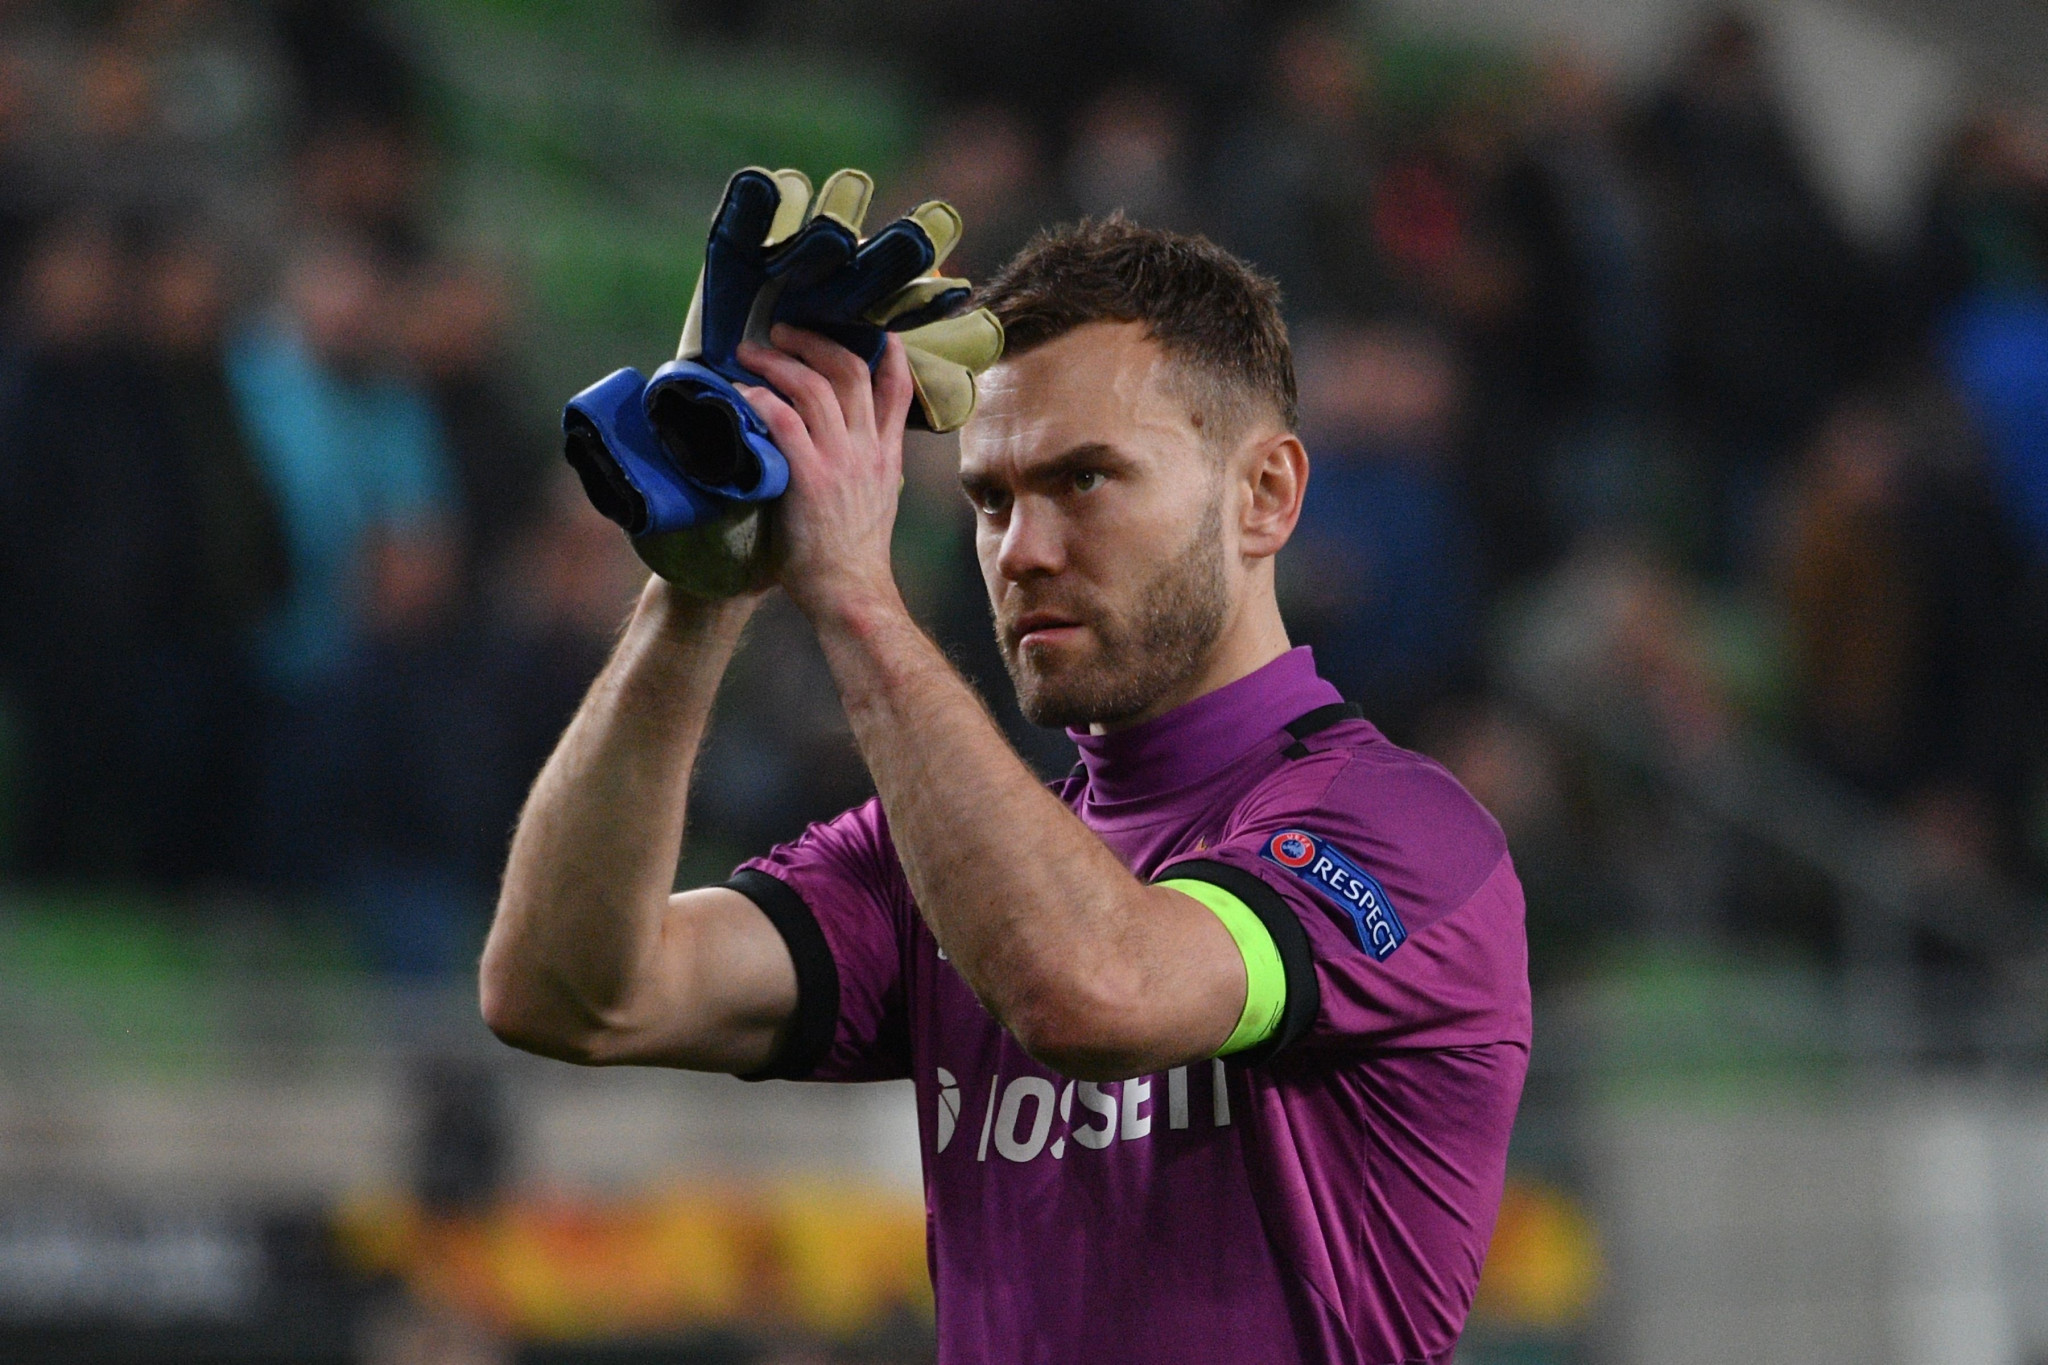 Russian goalkeeping great Igor Akinfeev, who plays for CSKA Moscow, has also been punished, denying him entry into Ukraine for 50 years ©Getty Images